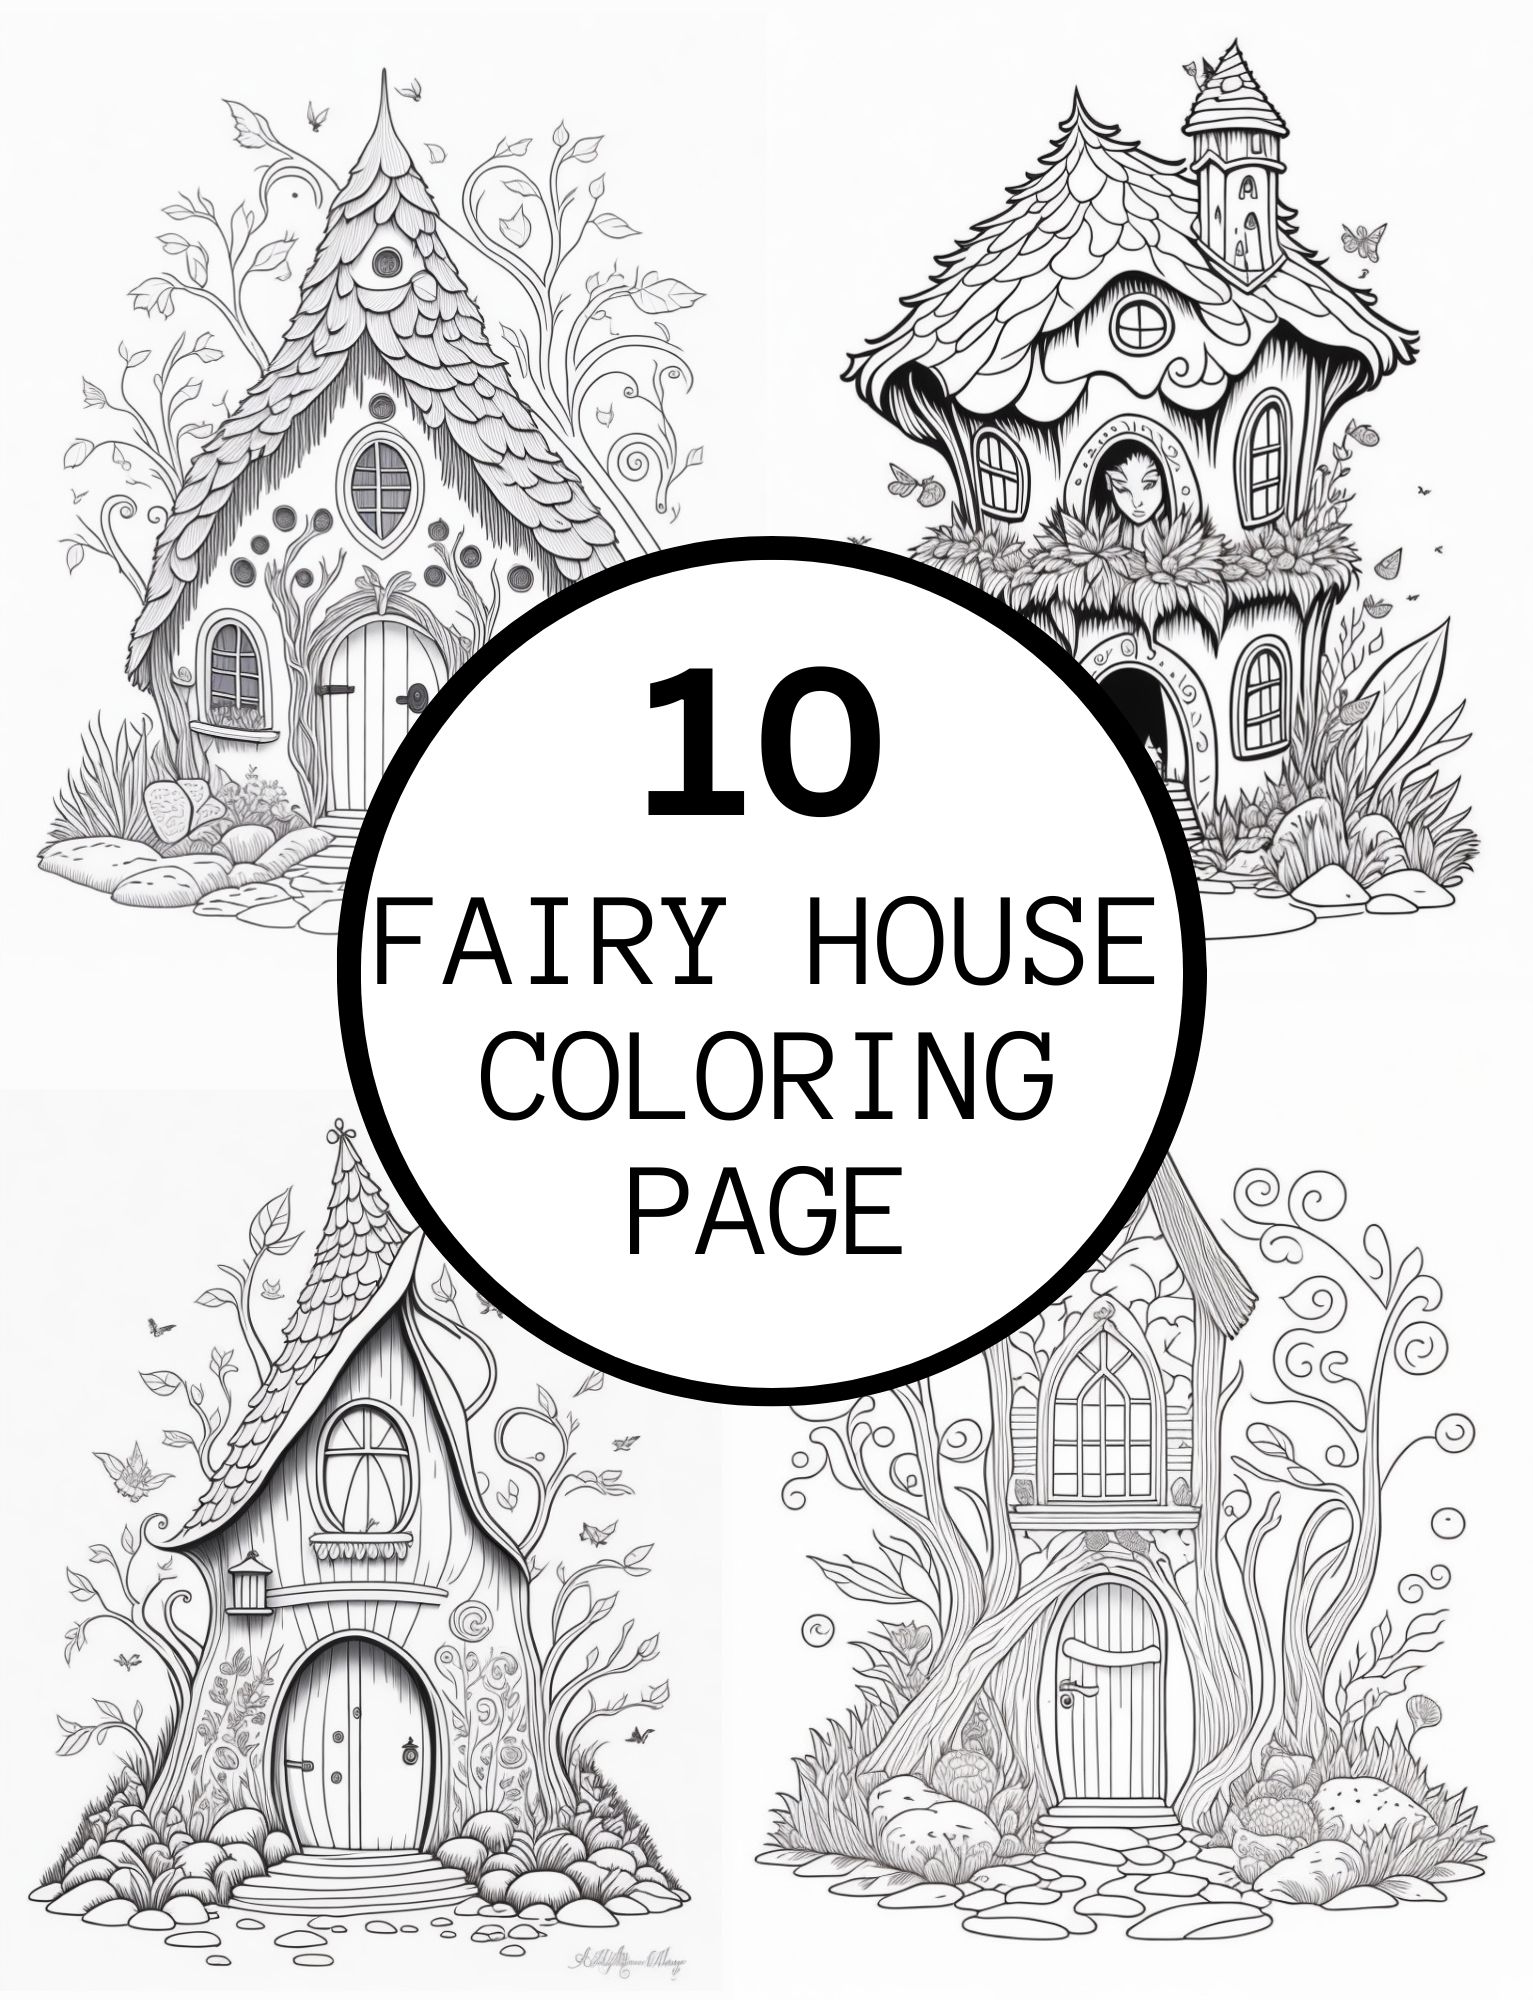 Realistic fairy house coloring pages for kids and adults made by teachers